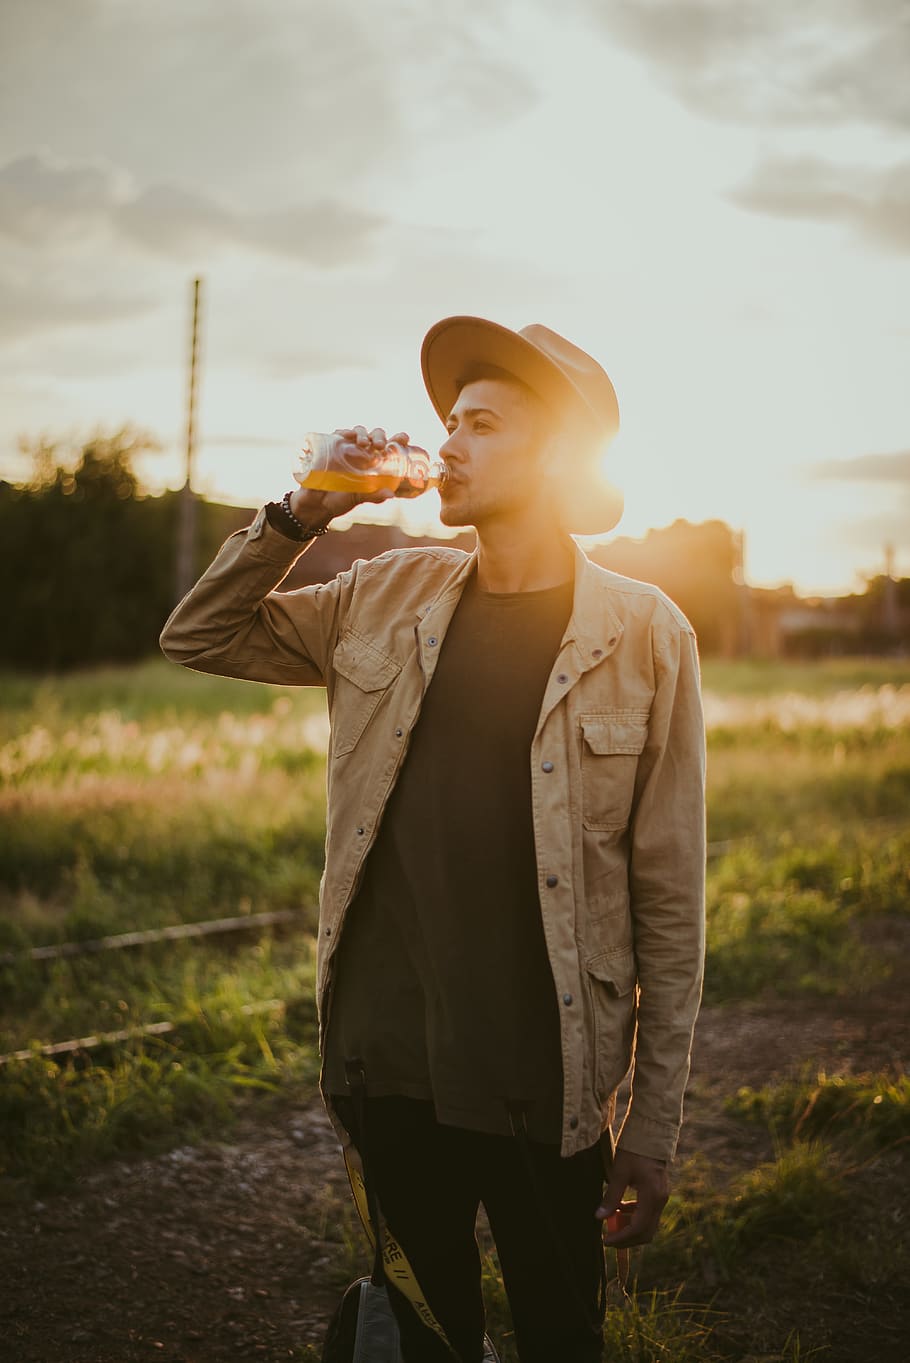 Photo of Man Drinking Juice Outside During Golden Hour, dawn